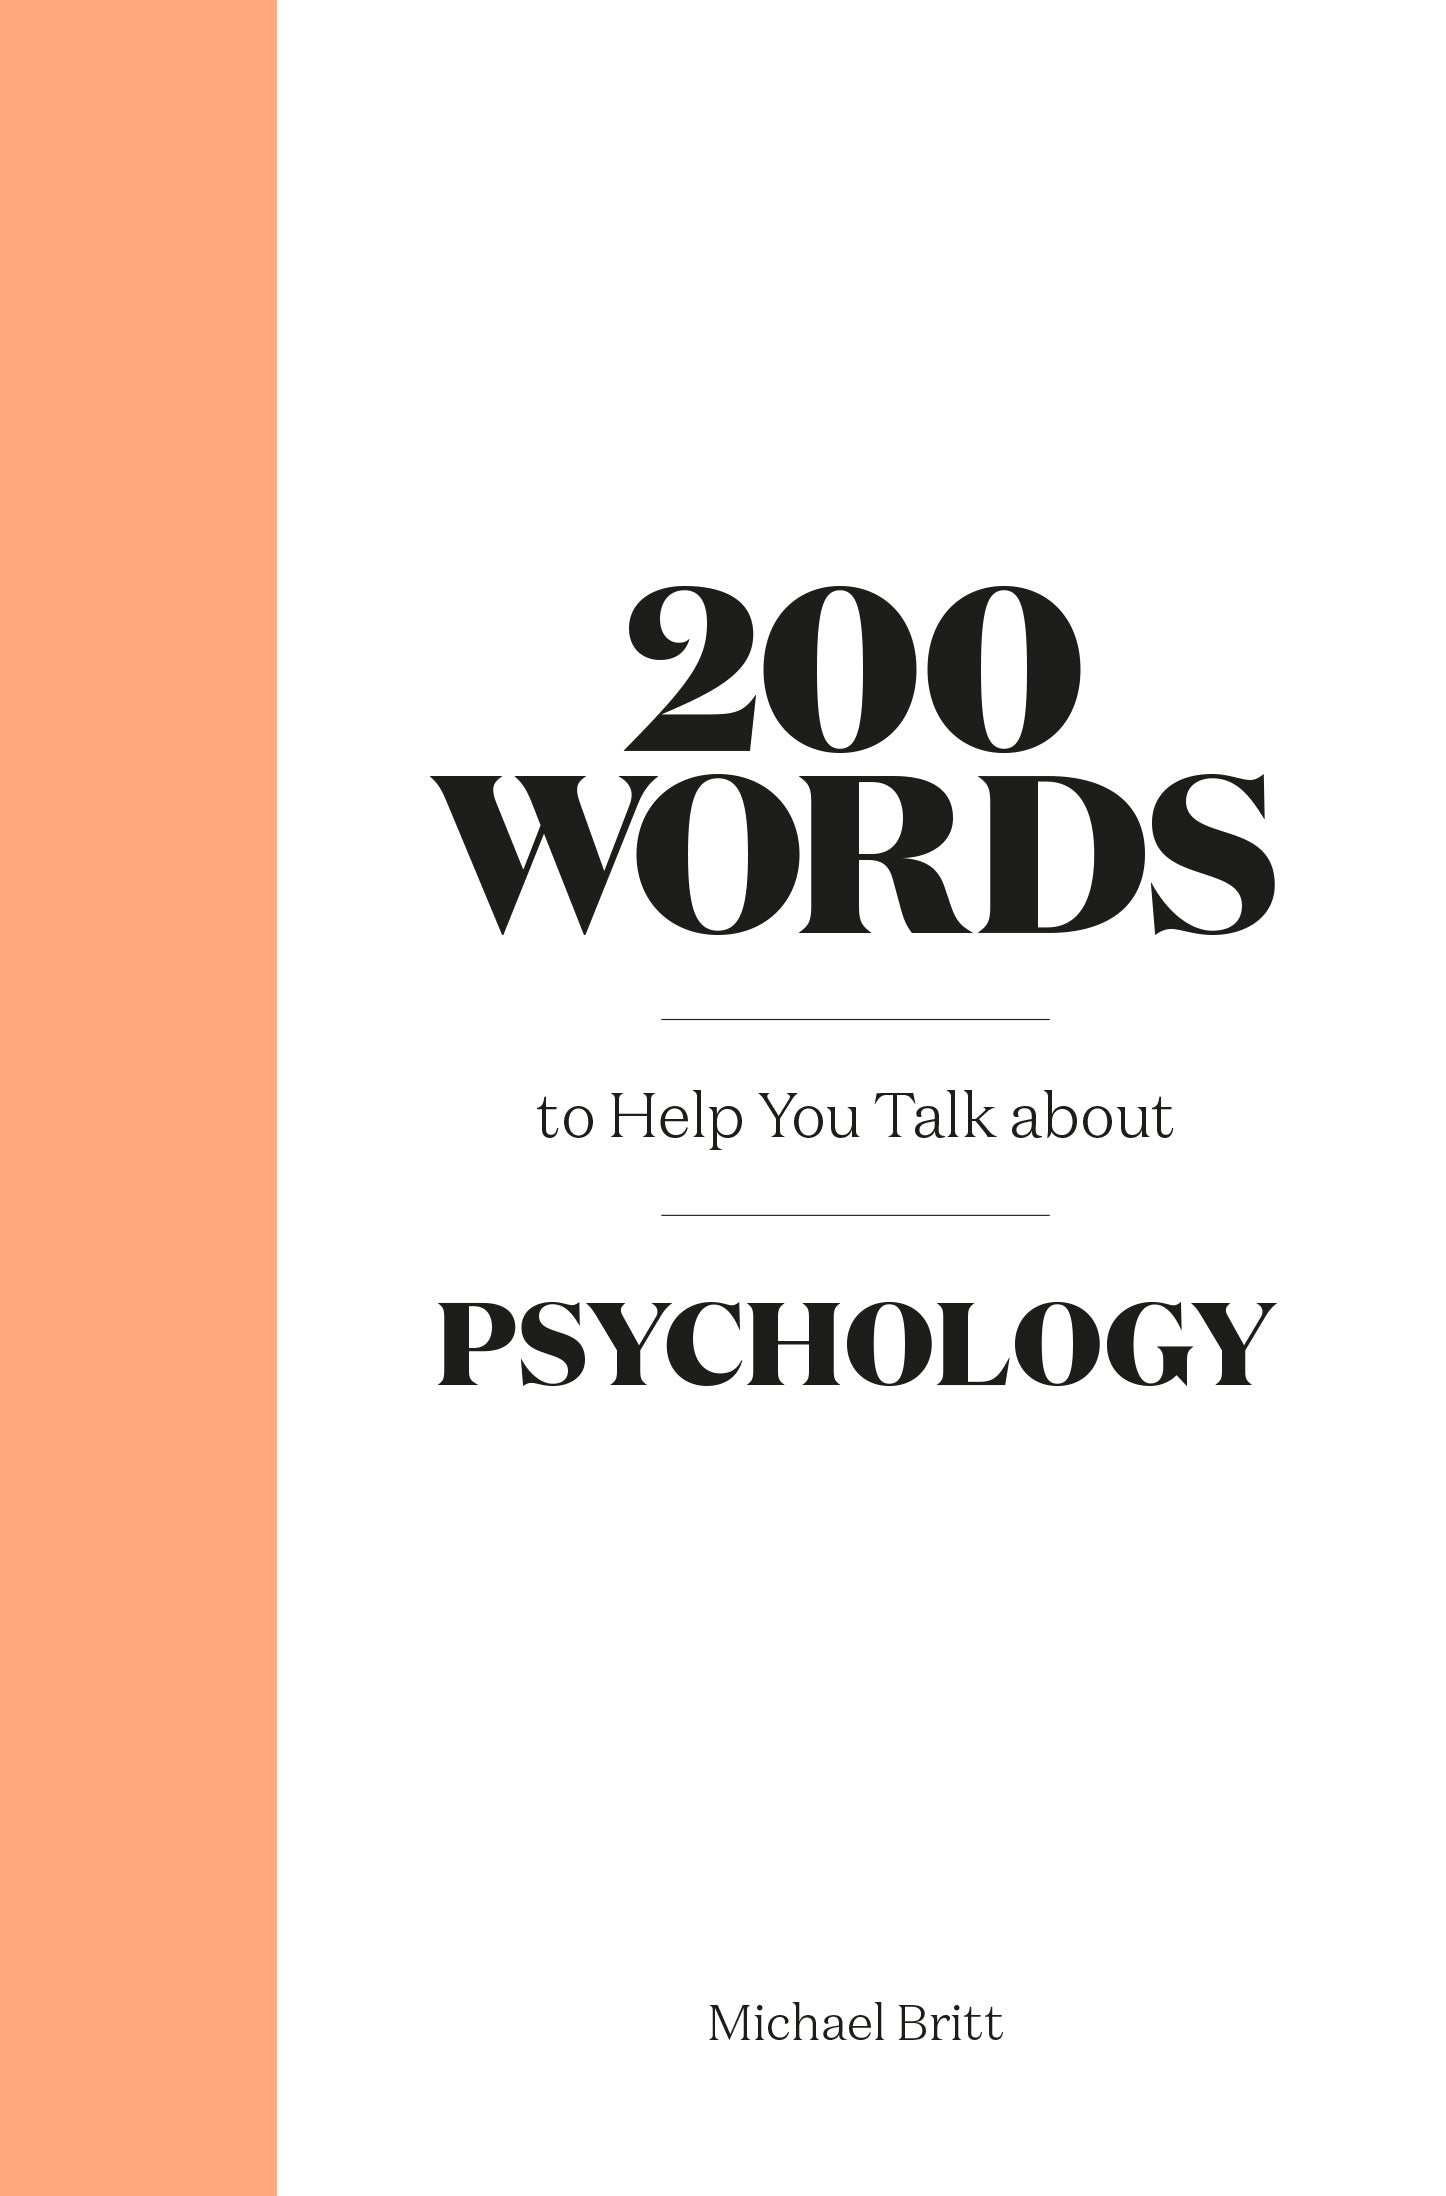 200 Words to Help You Talk About Psychology by Michael Britt